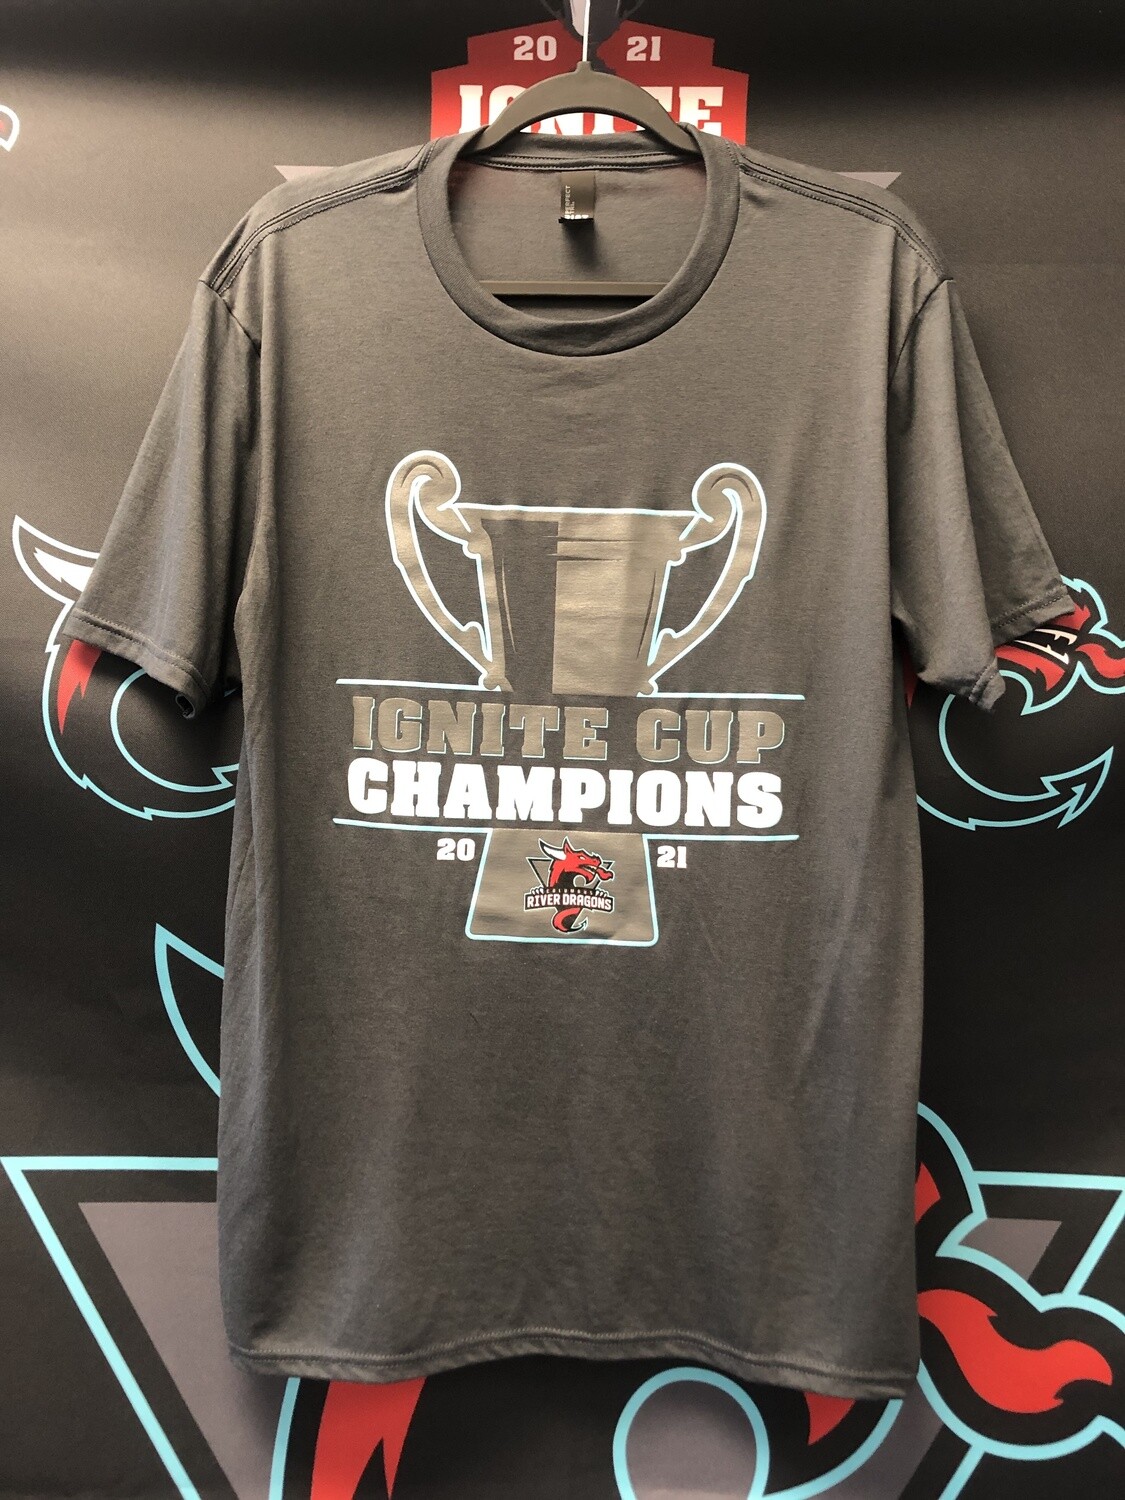 2021 Ignite Cup Champions Tee